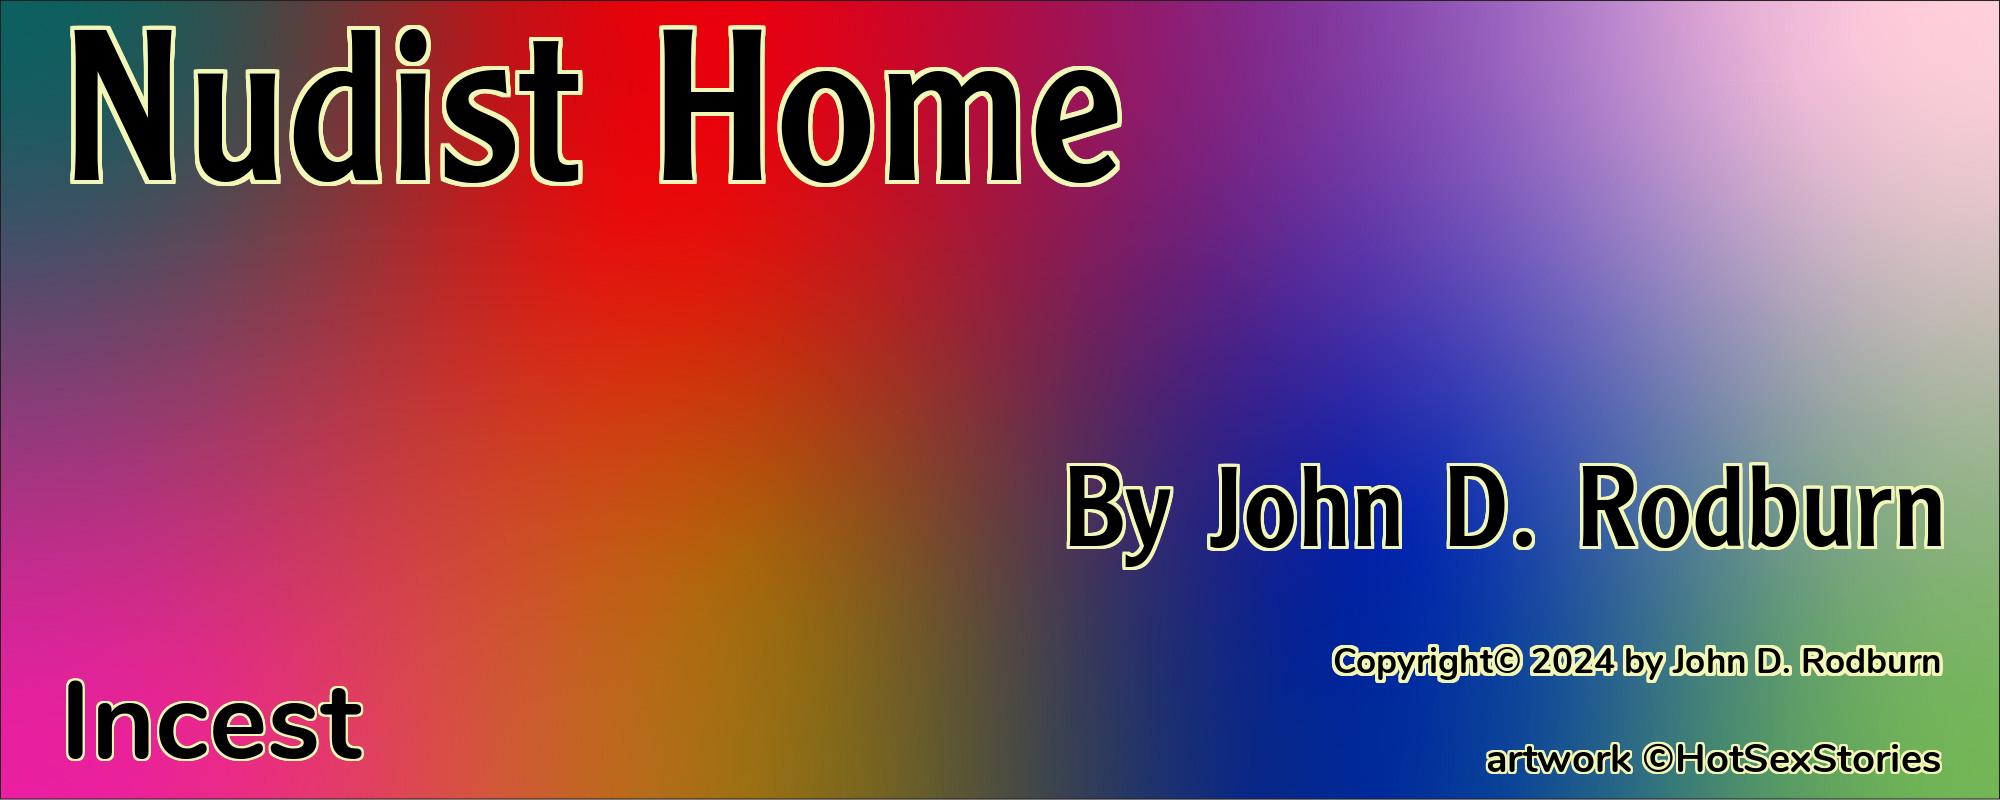 Nudist Home - Cover